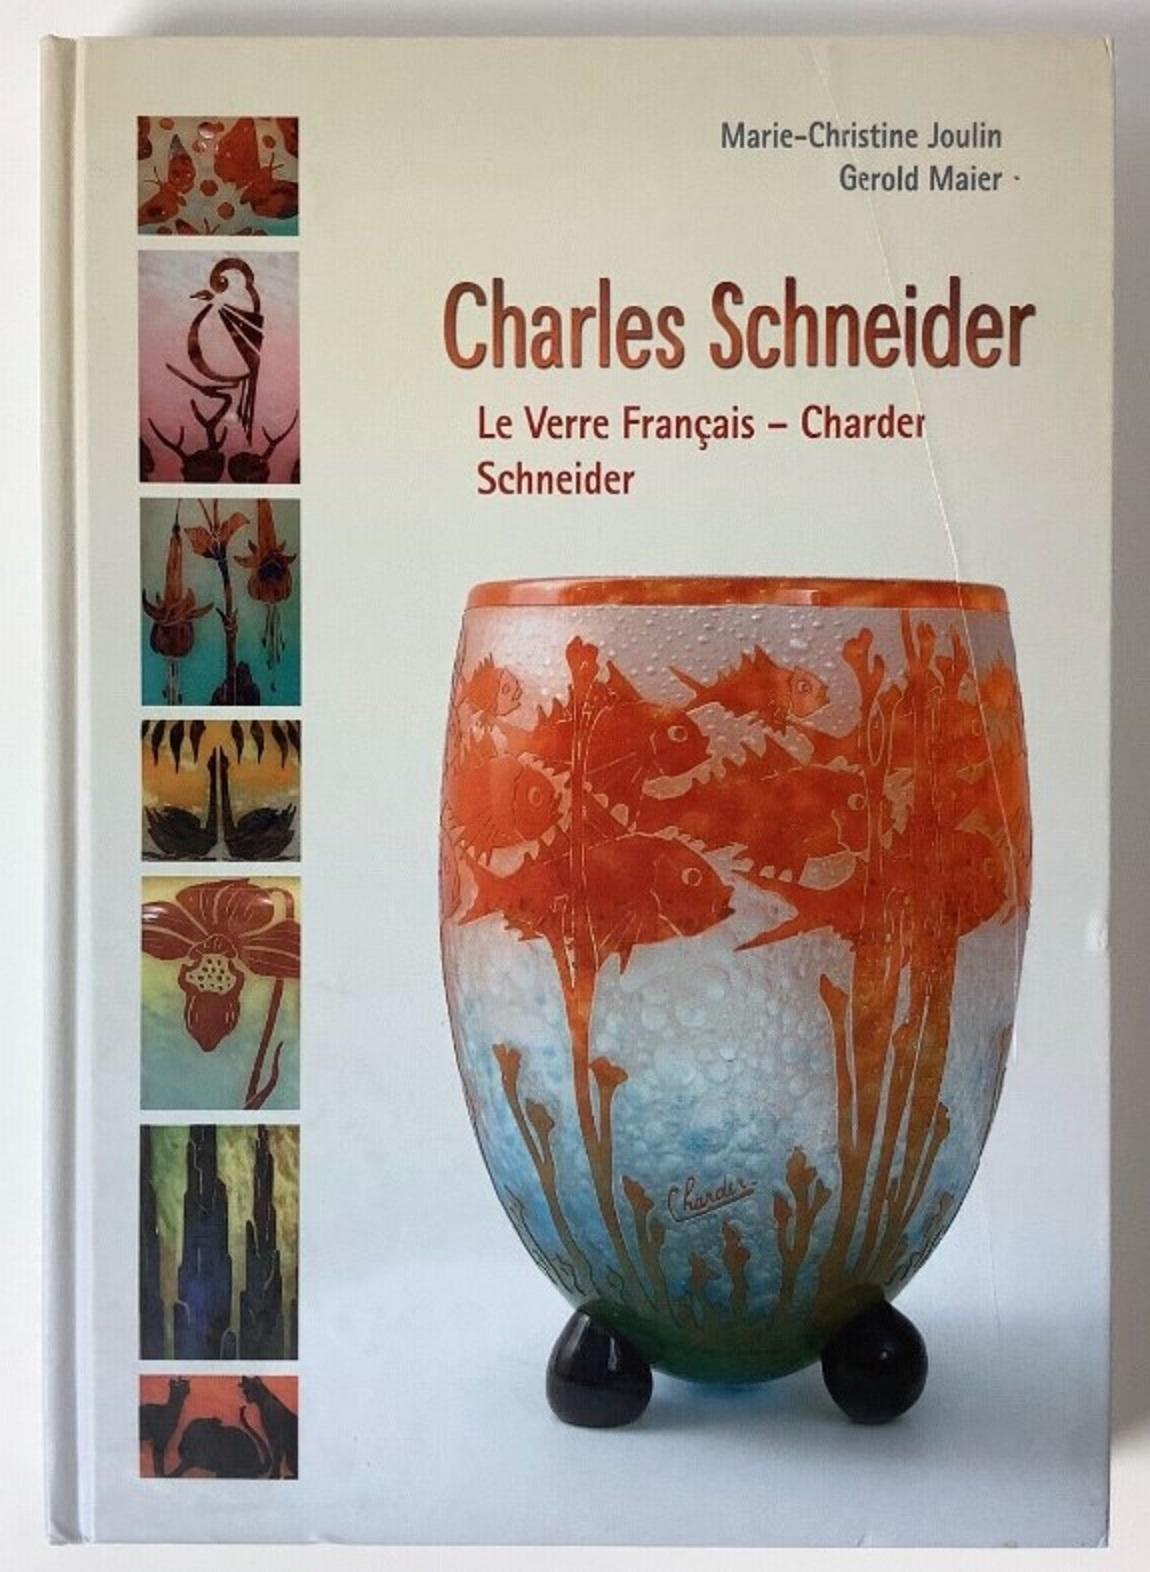 Vase Sign: Schneider
( Jade Decoration )
Schneider
Charles Schneider (1881-1953) studied art in two of most prestigious French school of the Arts. First in the School of Fine Arts in Nancy, then in the elite Ecole des Beaux Arts in Paris. While at